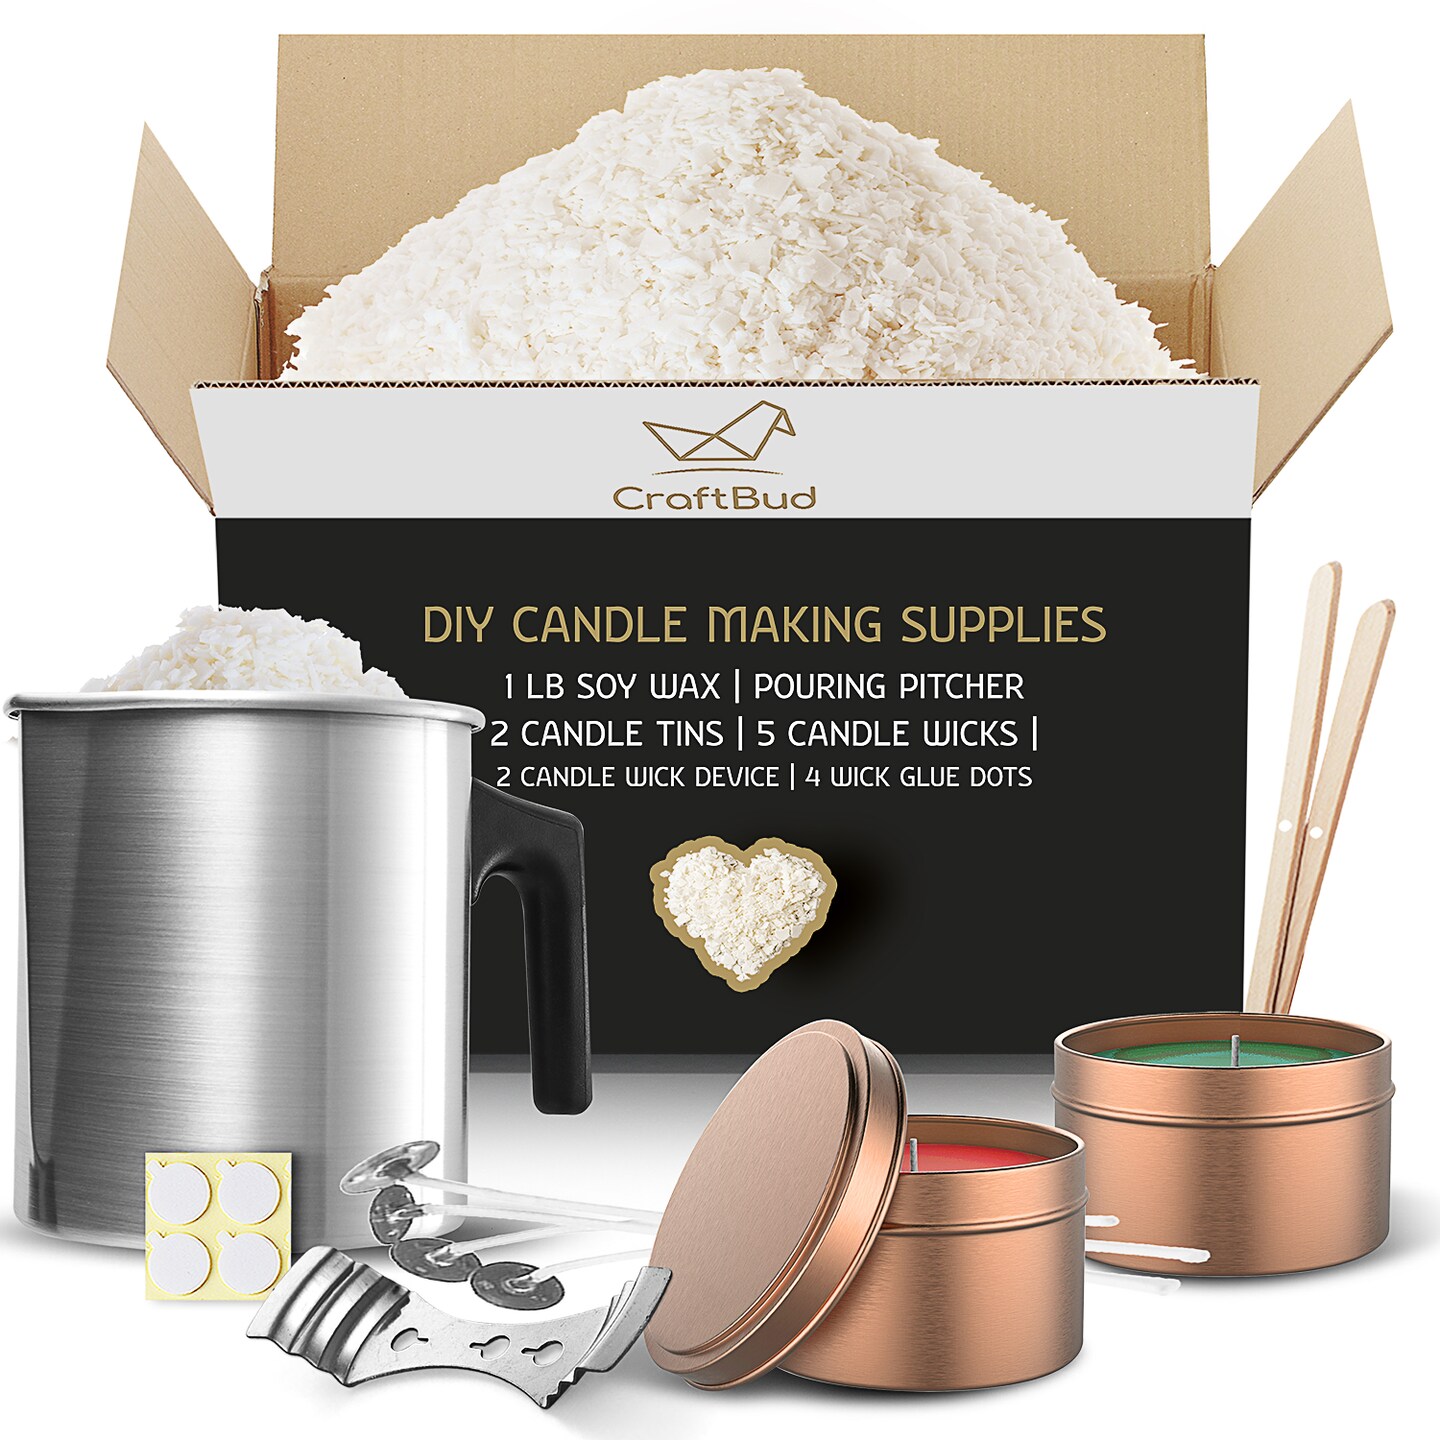 Craftbud Candle Making Kit - Candle Wax for Candle Making, 12.4oz Natural  Soy Wax, 900ml Stainless Steel Pot, Cotton Wicks, Wick Stickers, Dye  Blocks, Mixing Spoon, and Metal Centering Tool 